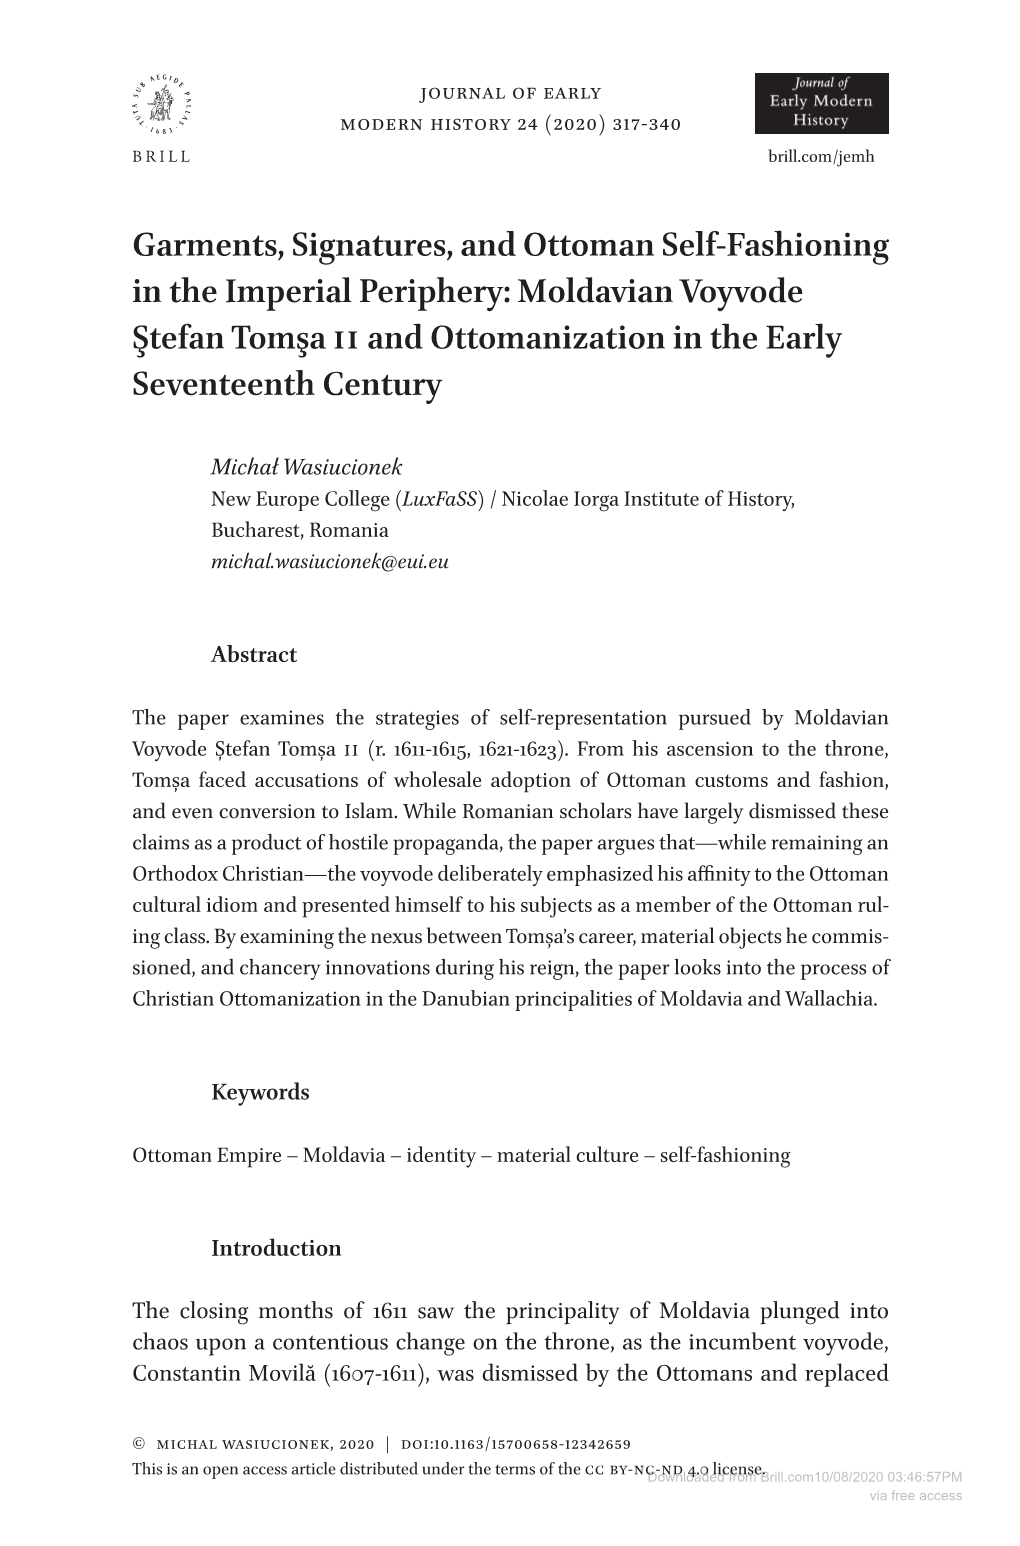 Garments, Signatures, and Ottoman Self-Fashioning in the Imperial Periphery: Moldavian Voyvode Ştefan Tomşa II and Ottomanization in the Early Seventeenth Century